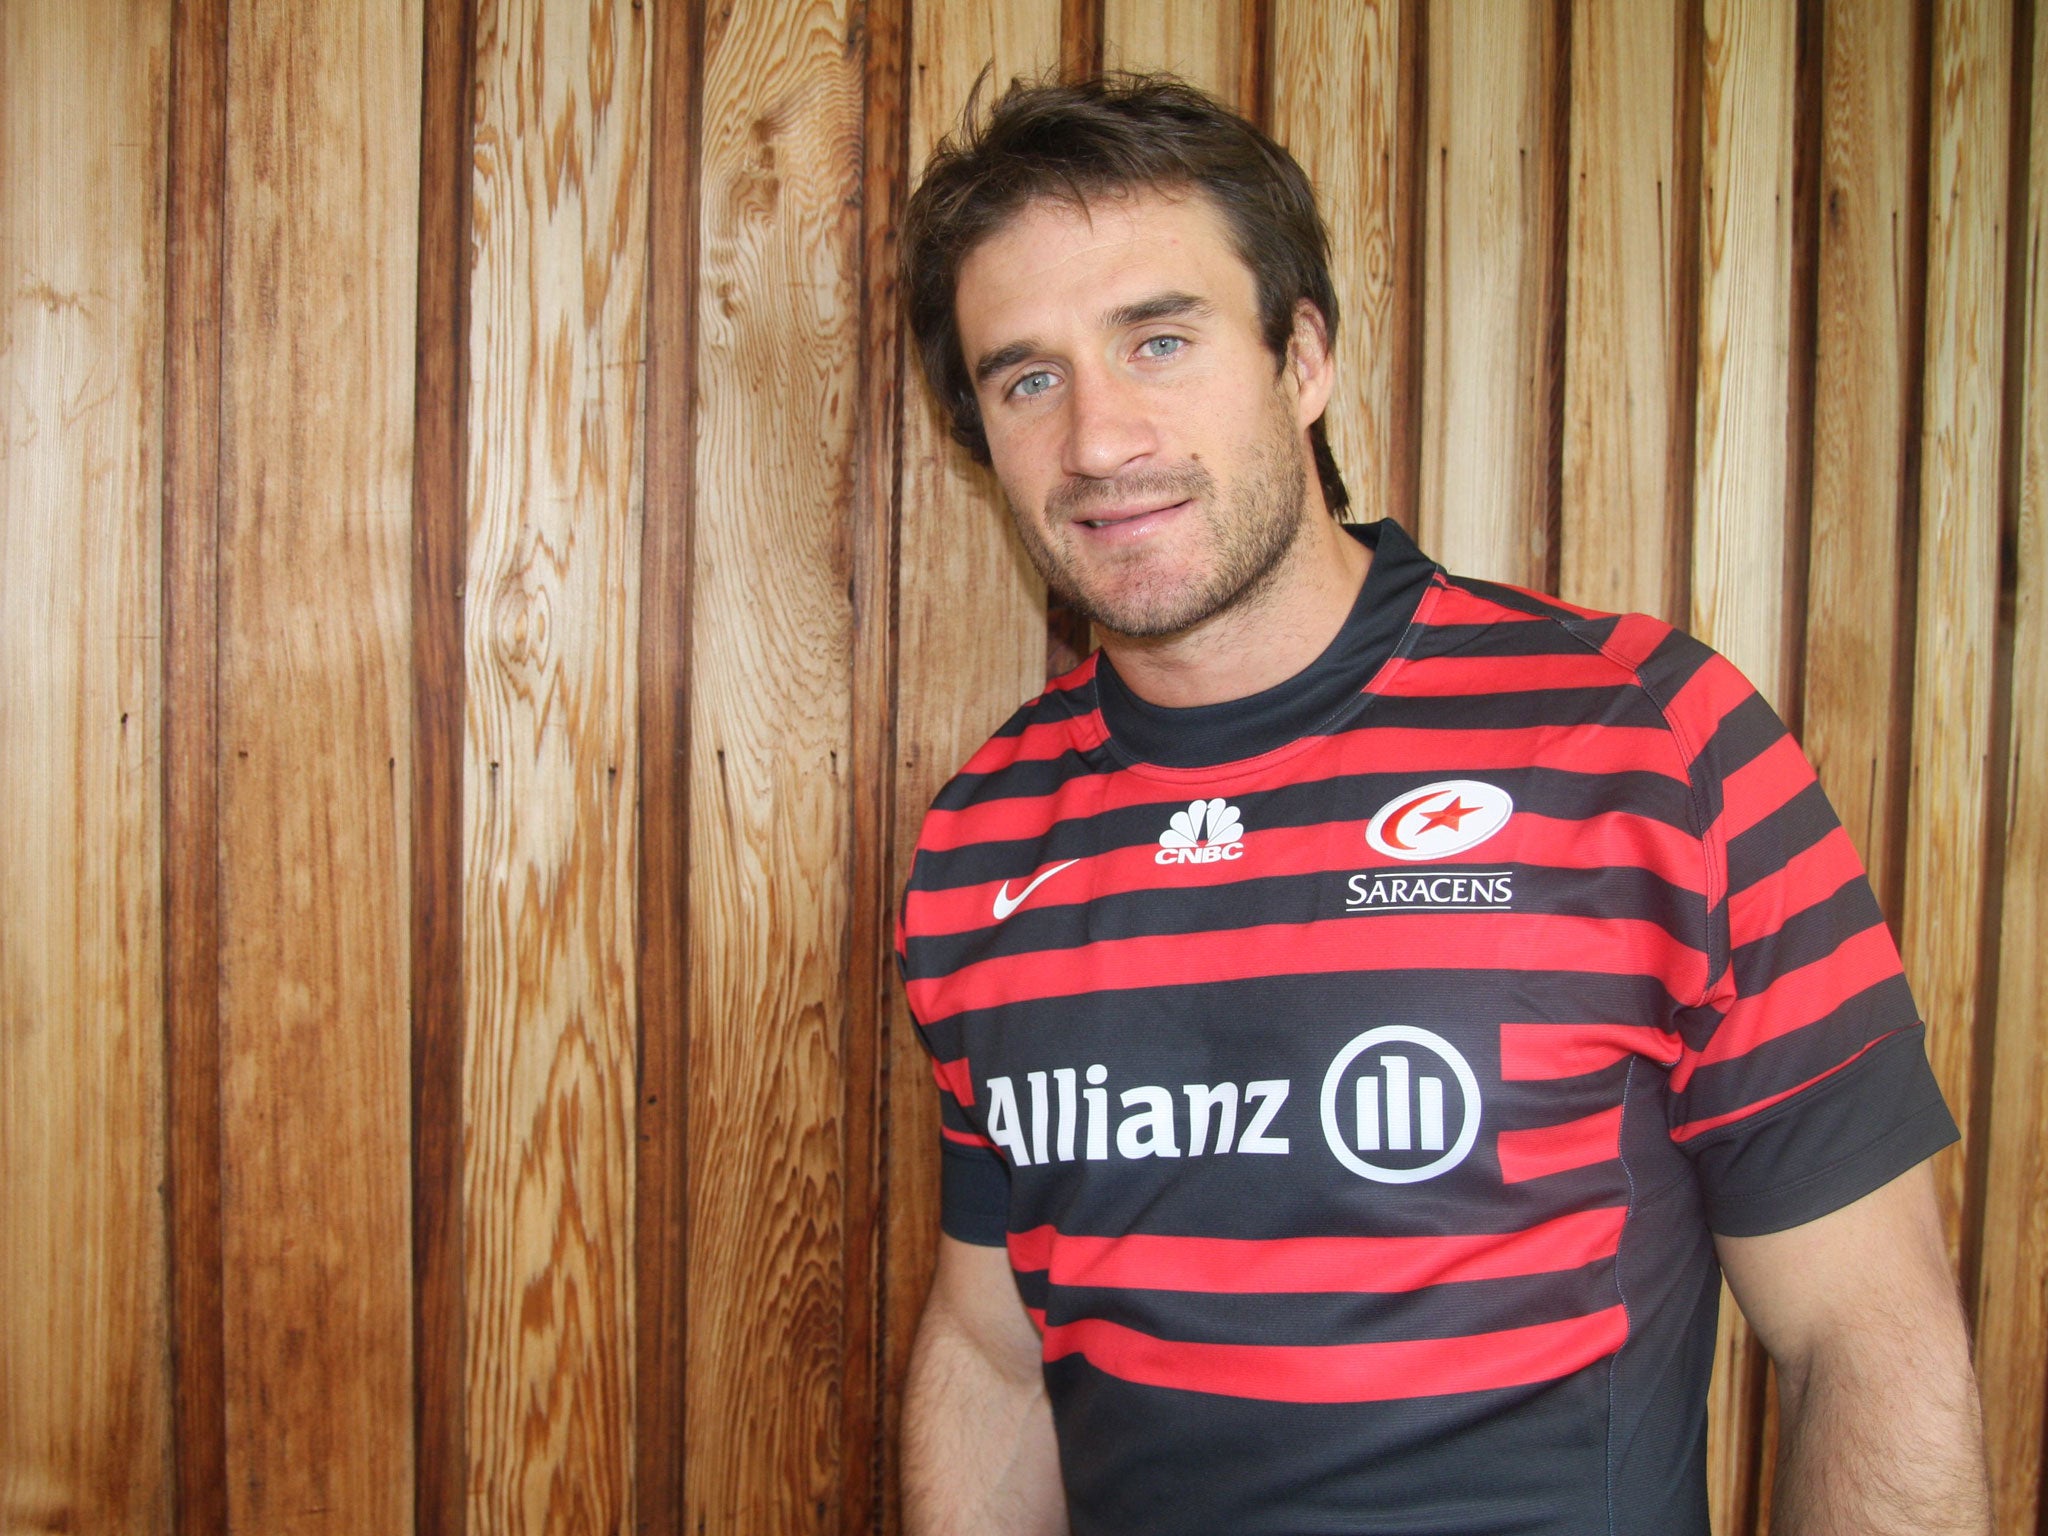 Saracens have confirmed the signing of Argentina international centre Marcelo Bosch